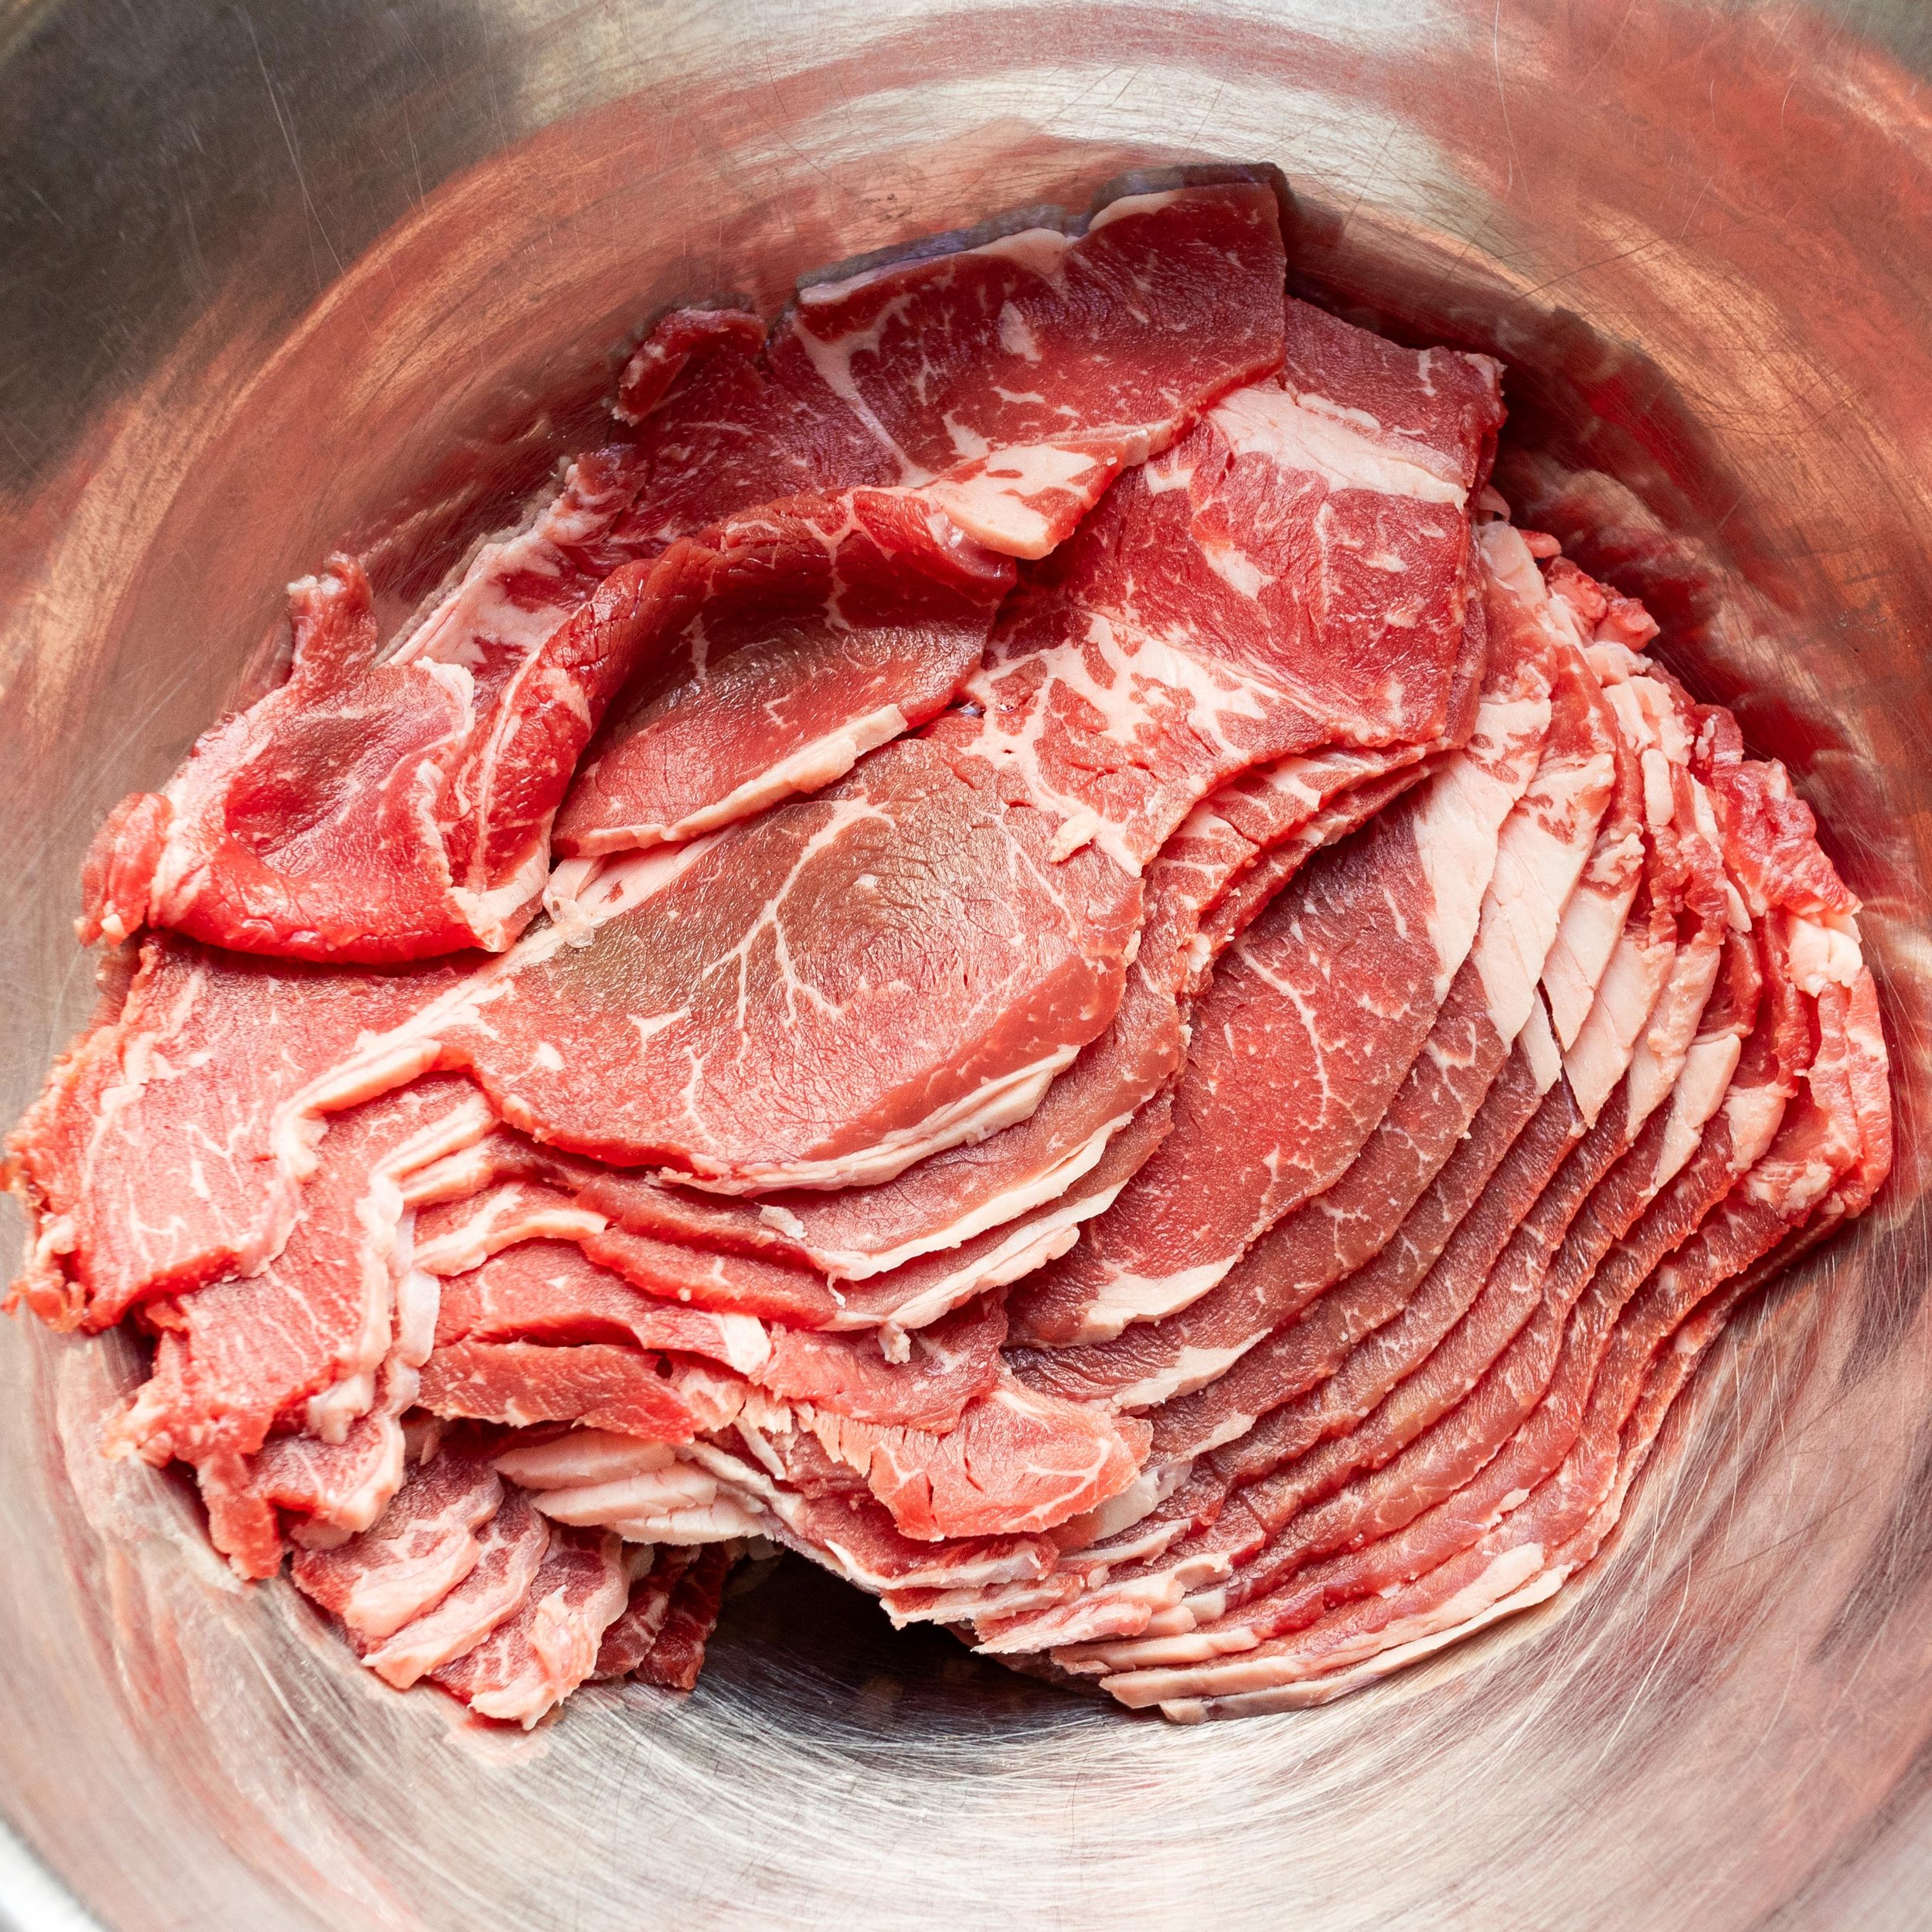 Thinly sliced beef sirloin